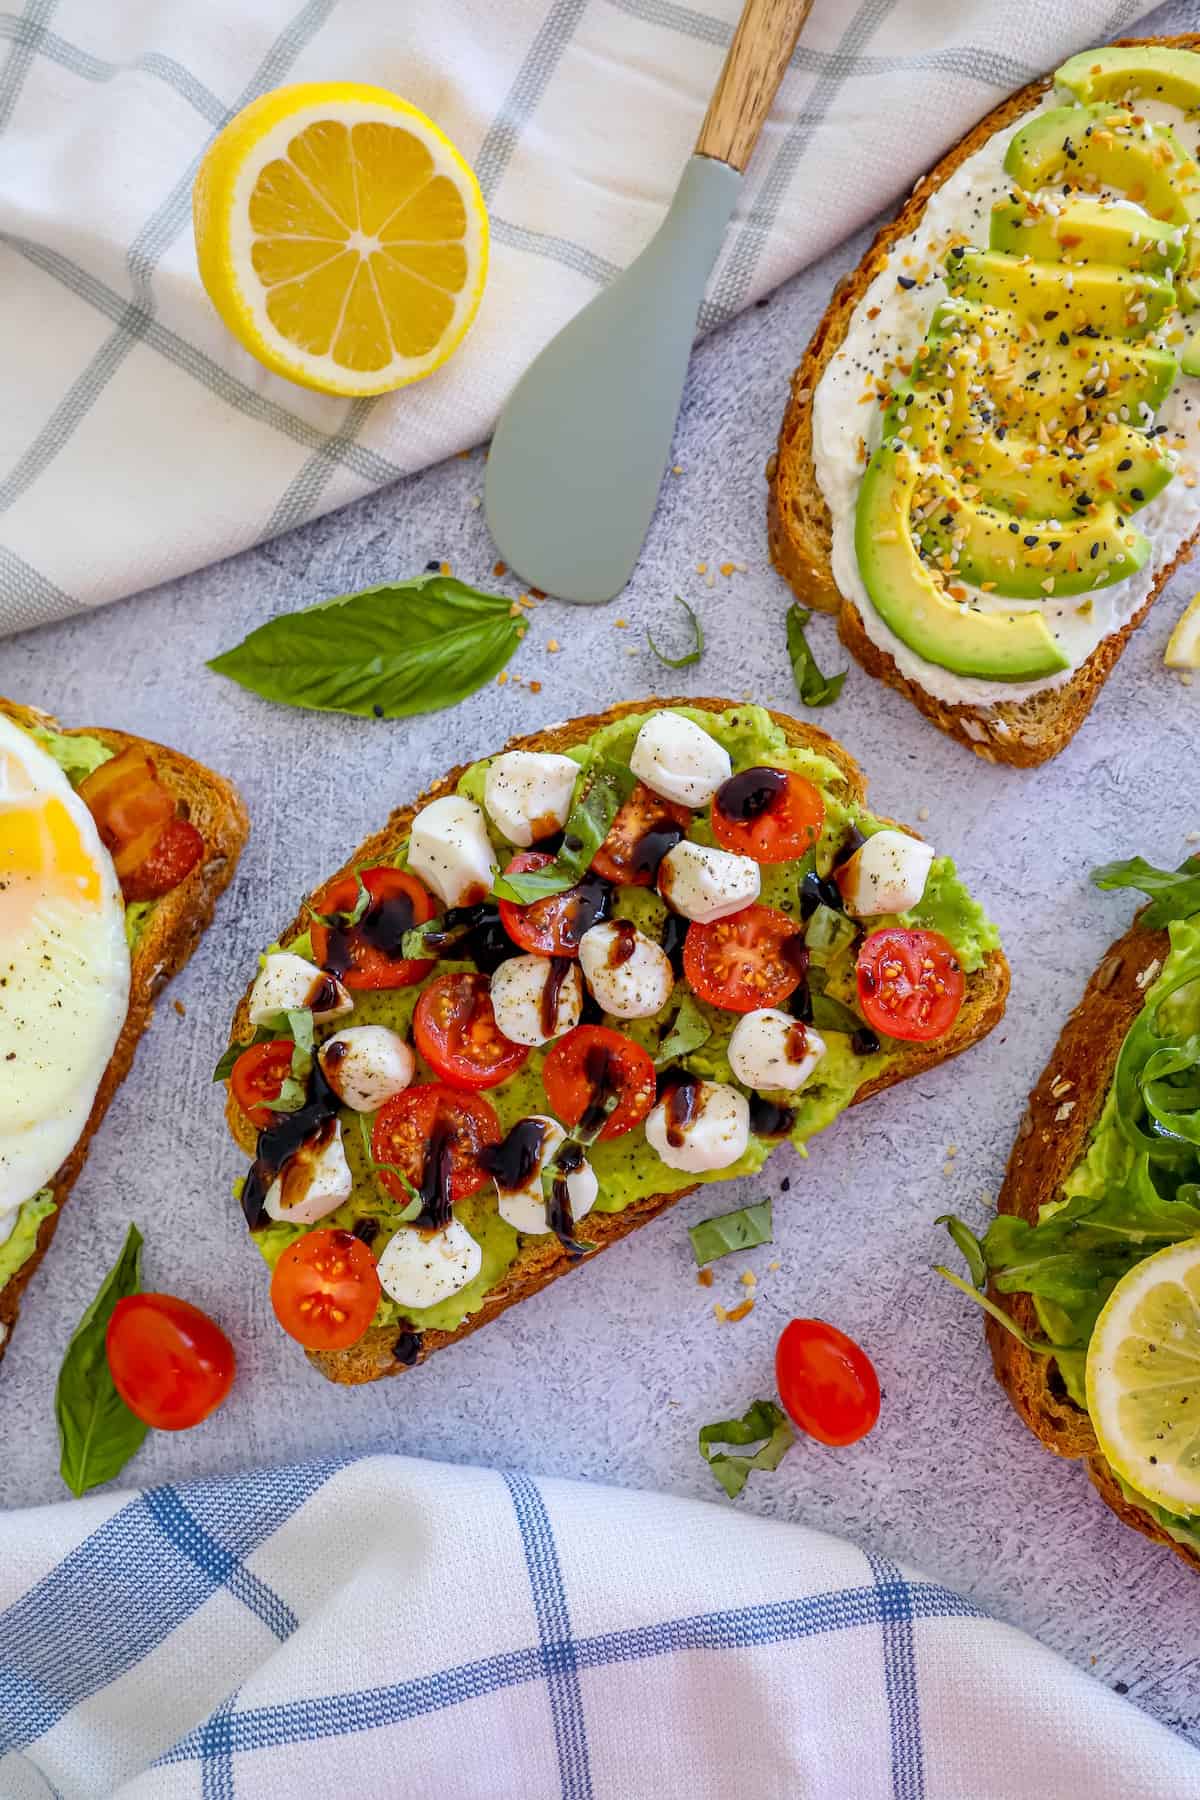 Four slices of toast with tomatoes, avocado, eggs and lemons.